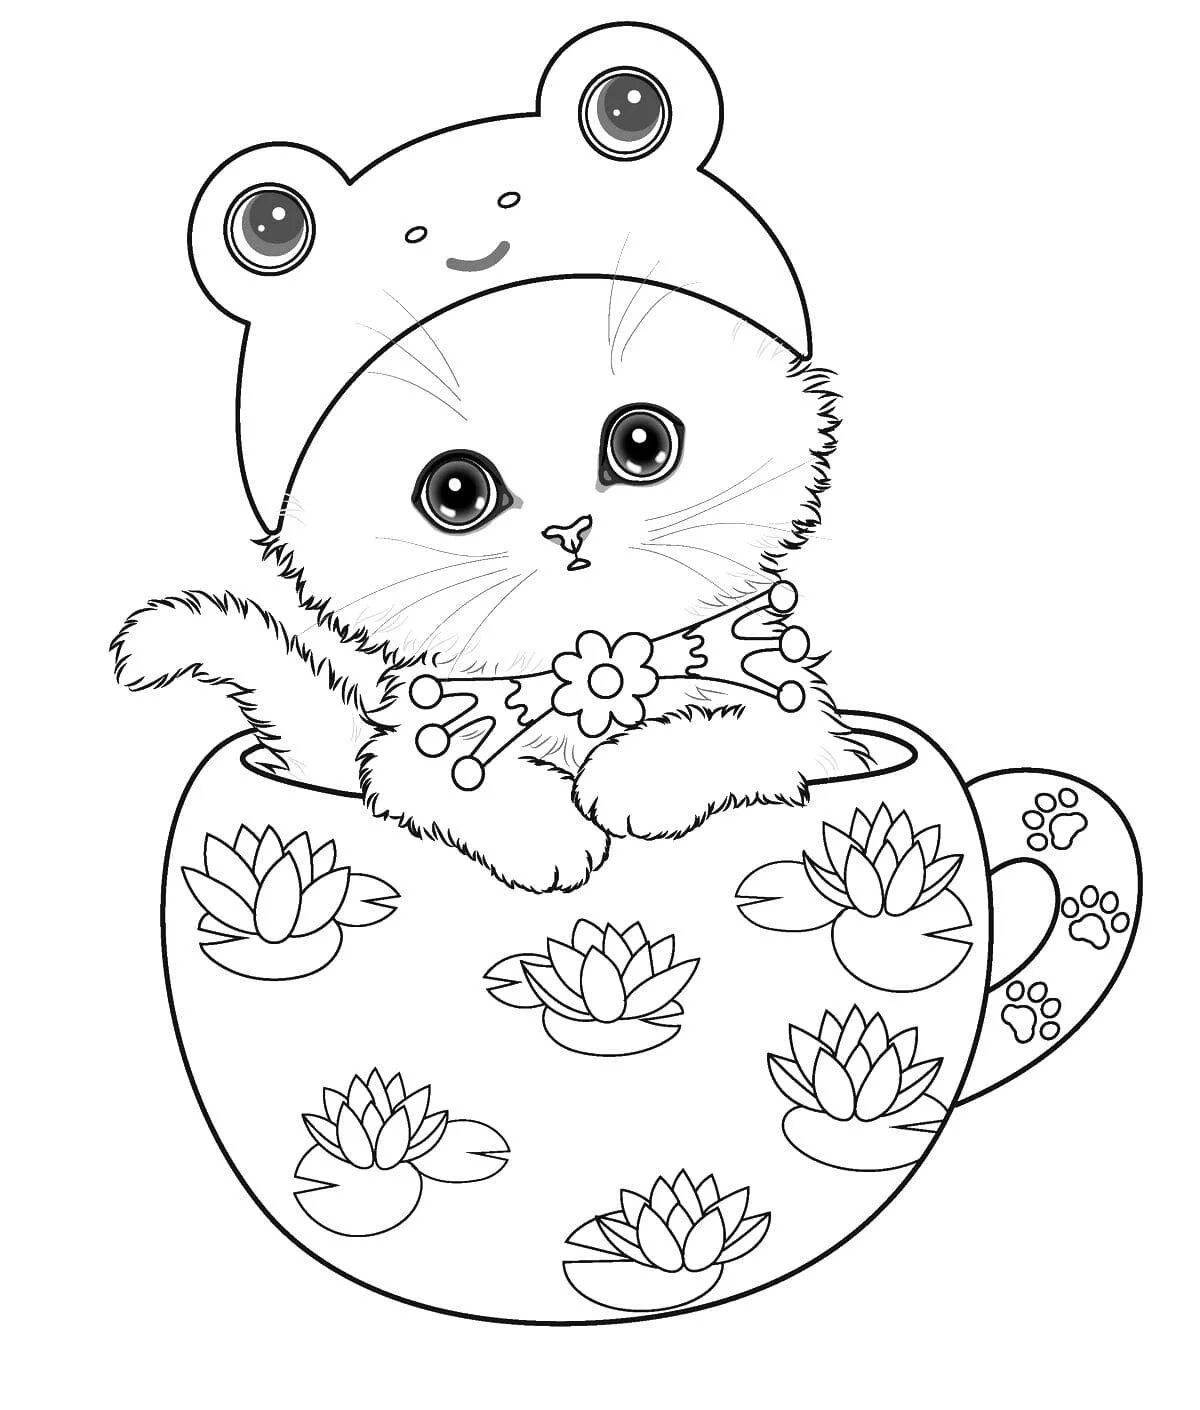 Blessed kitten coloring page